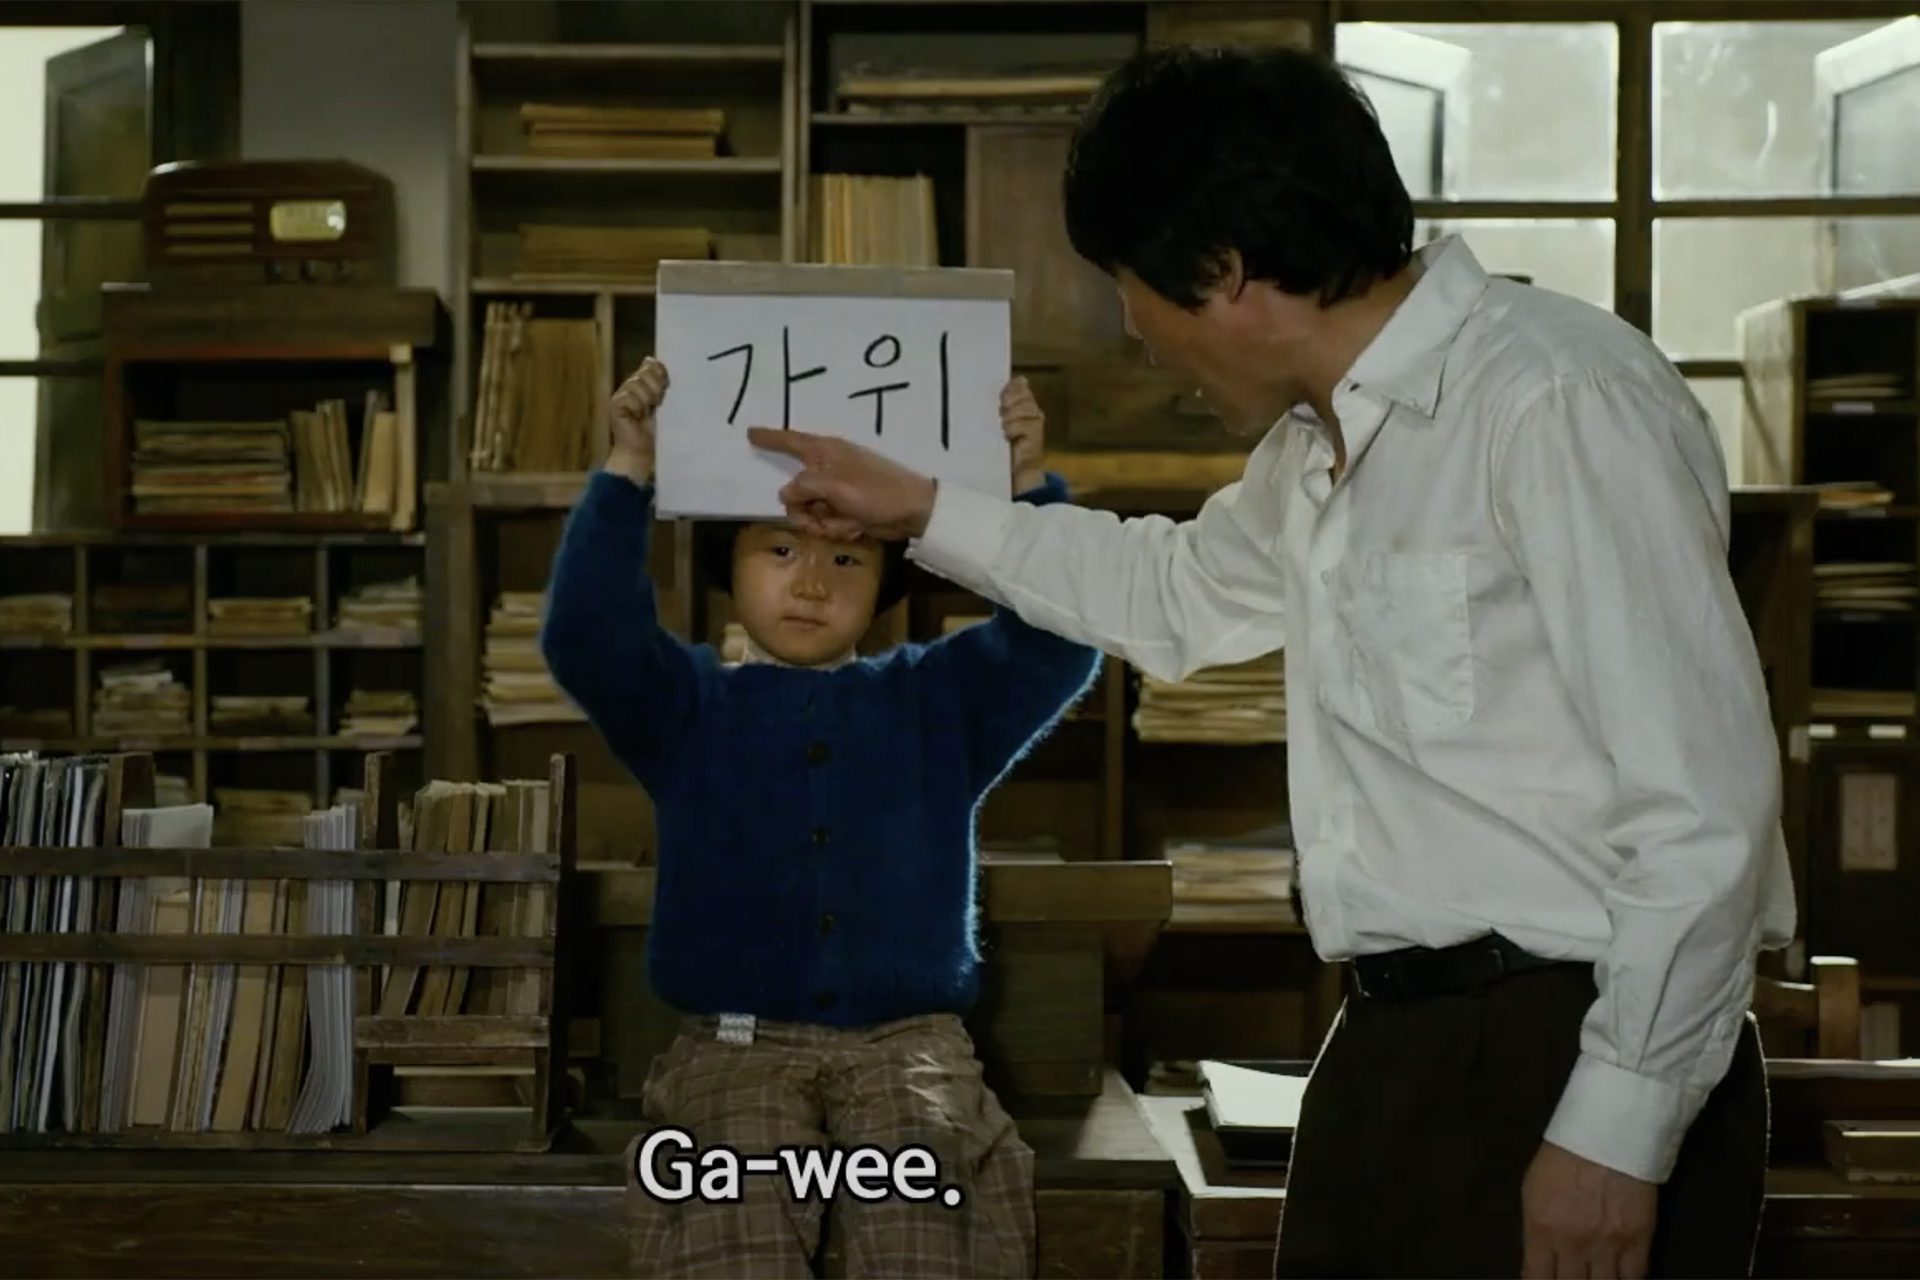 a girl holds up a sign in Korean and a man points to it